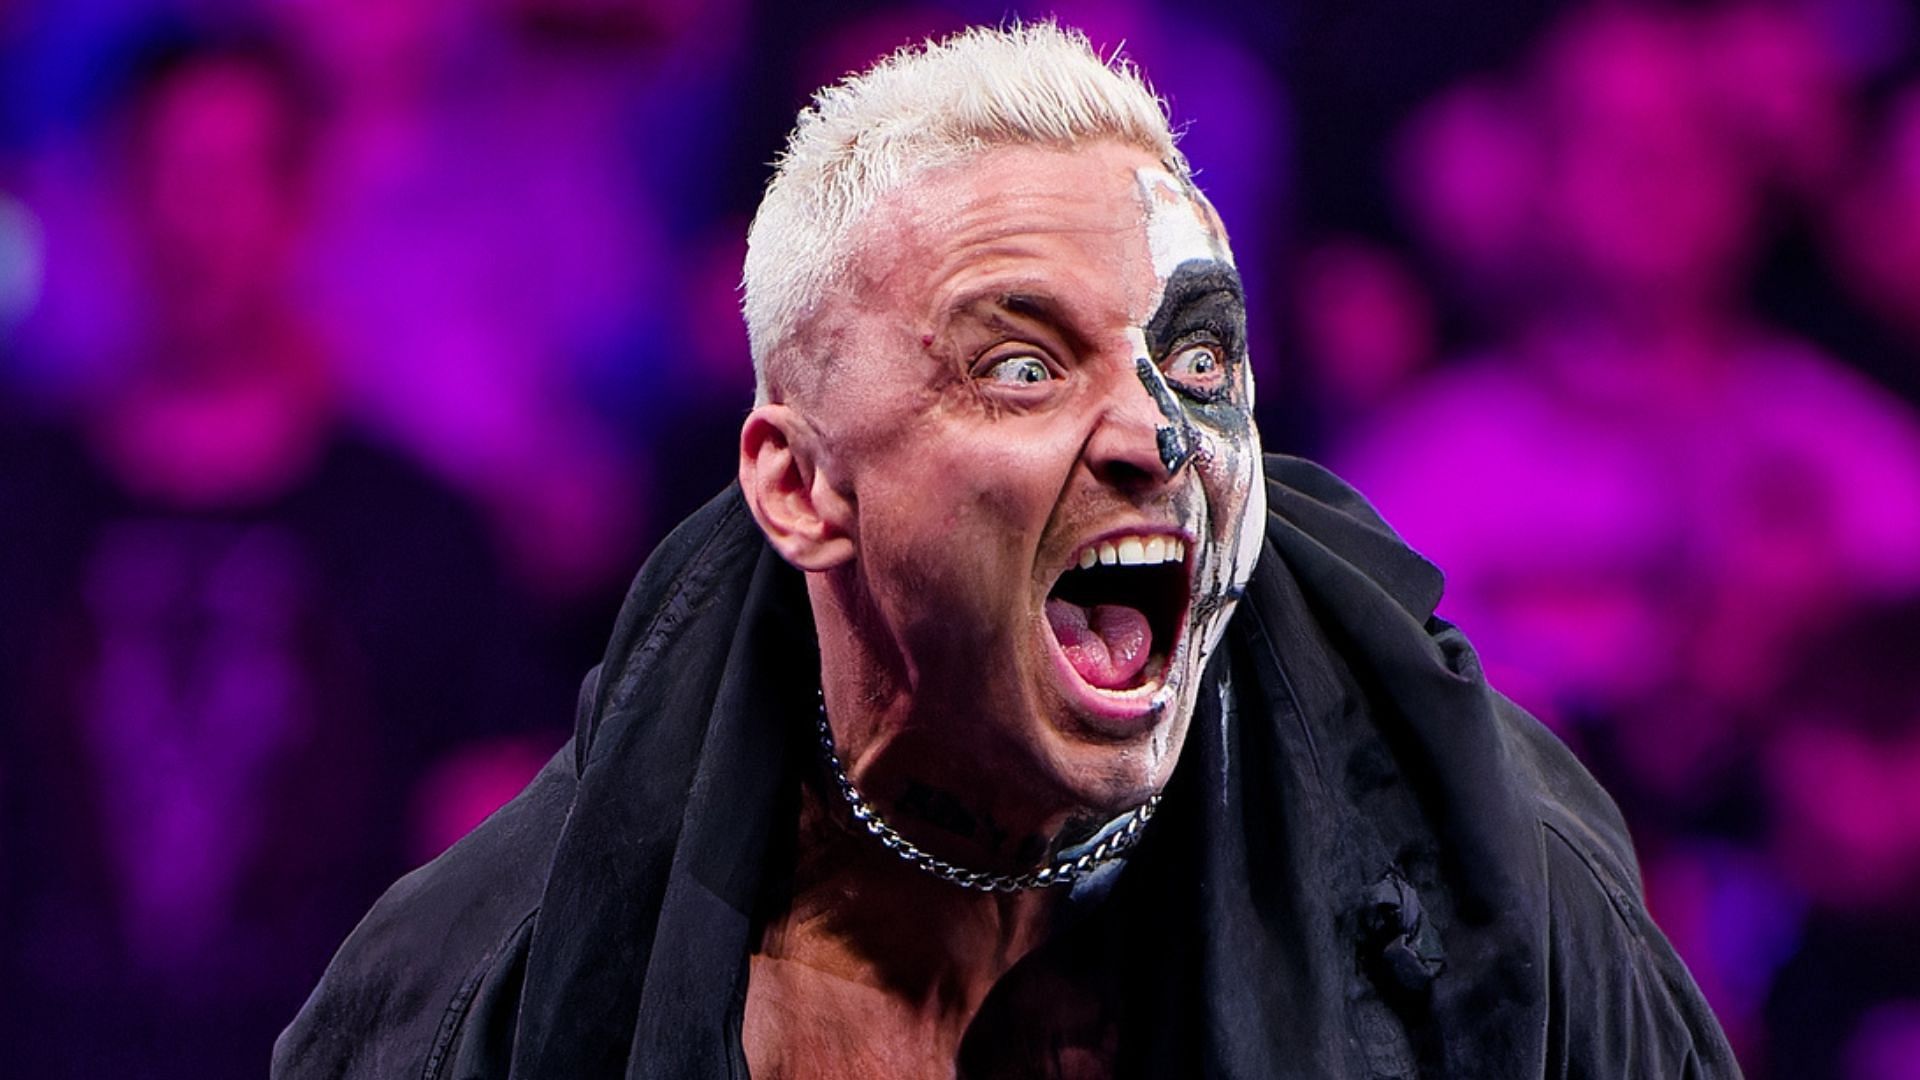 Darby Allin has performed another death-defying stunt